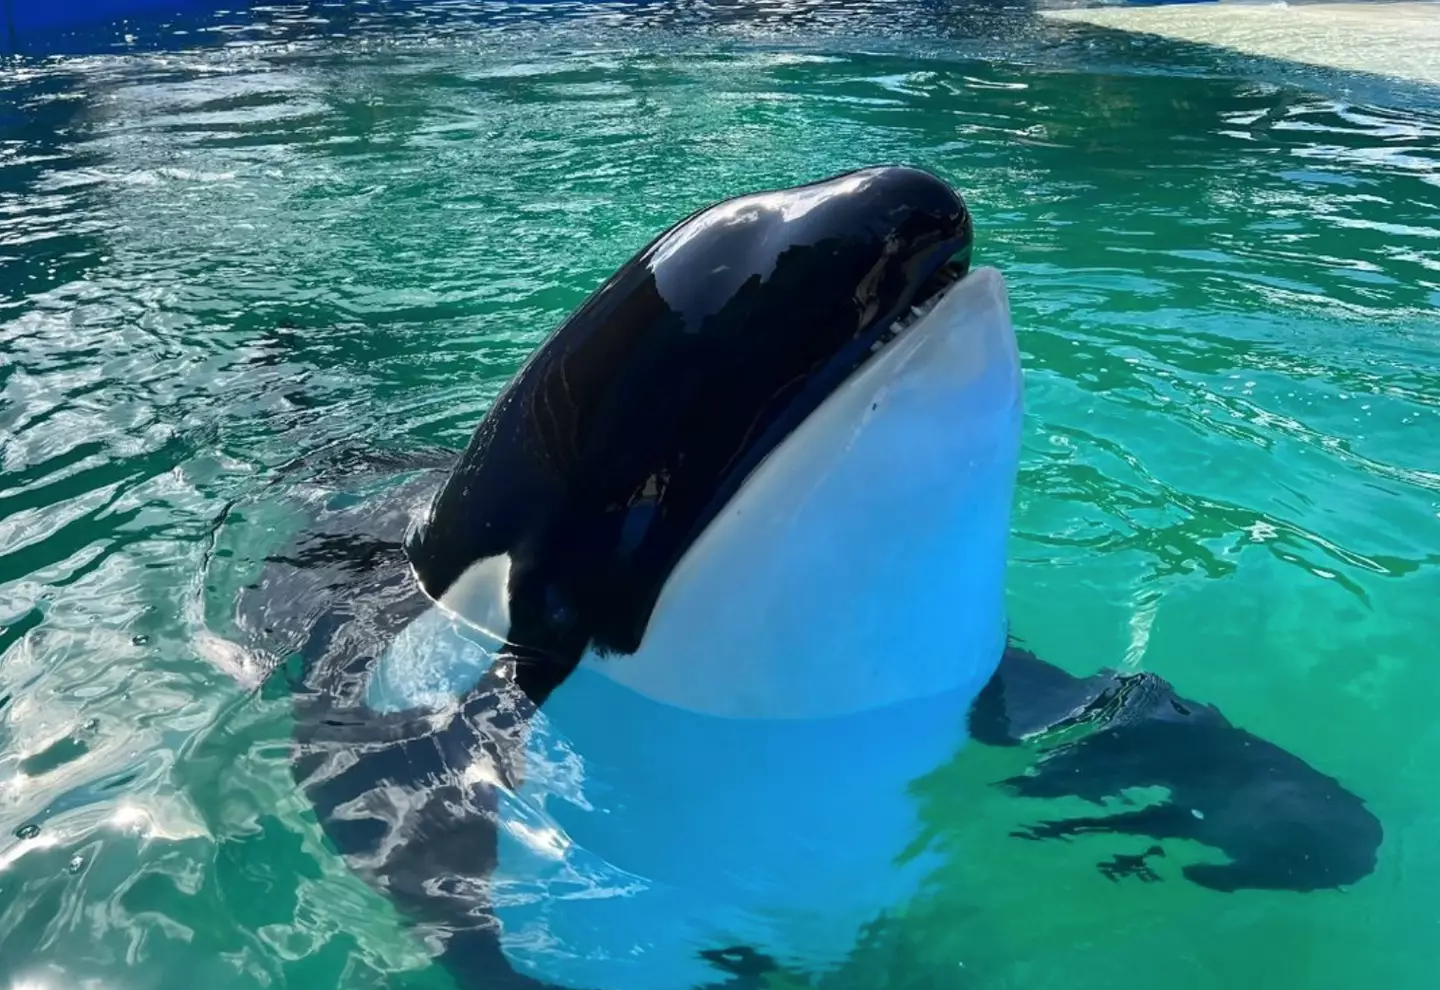 Lolita the orca has died from what is believed to be a renal condition.